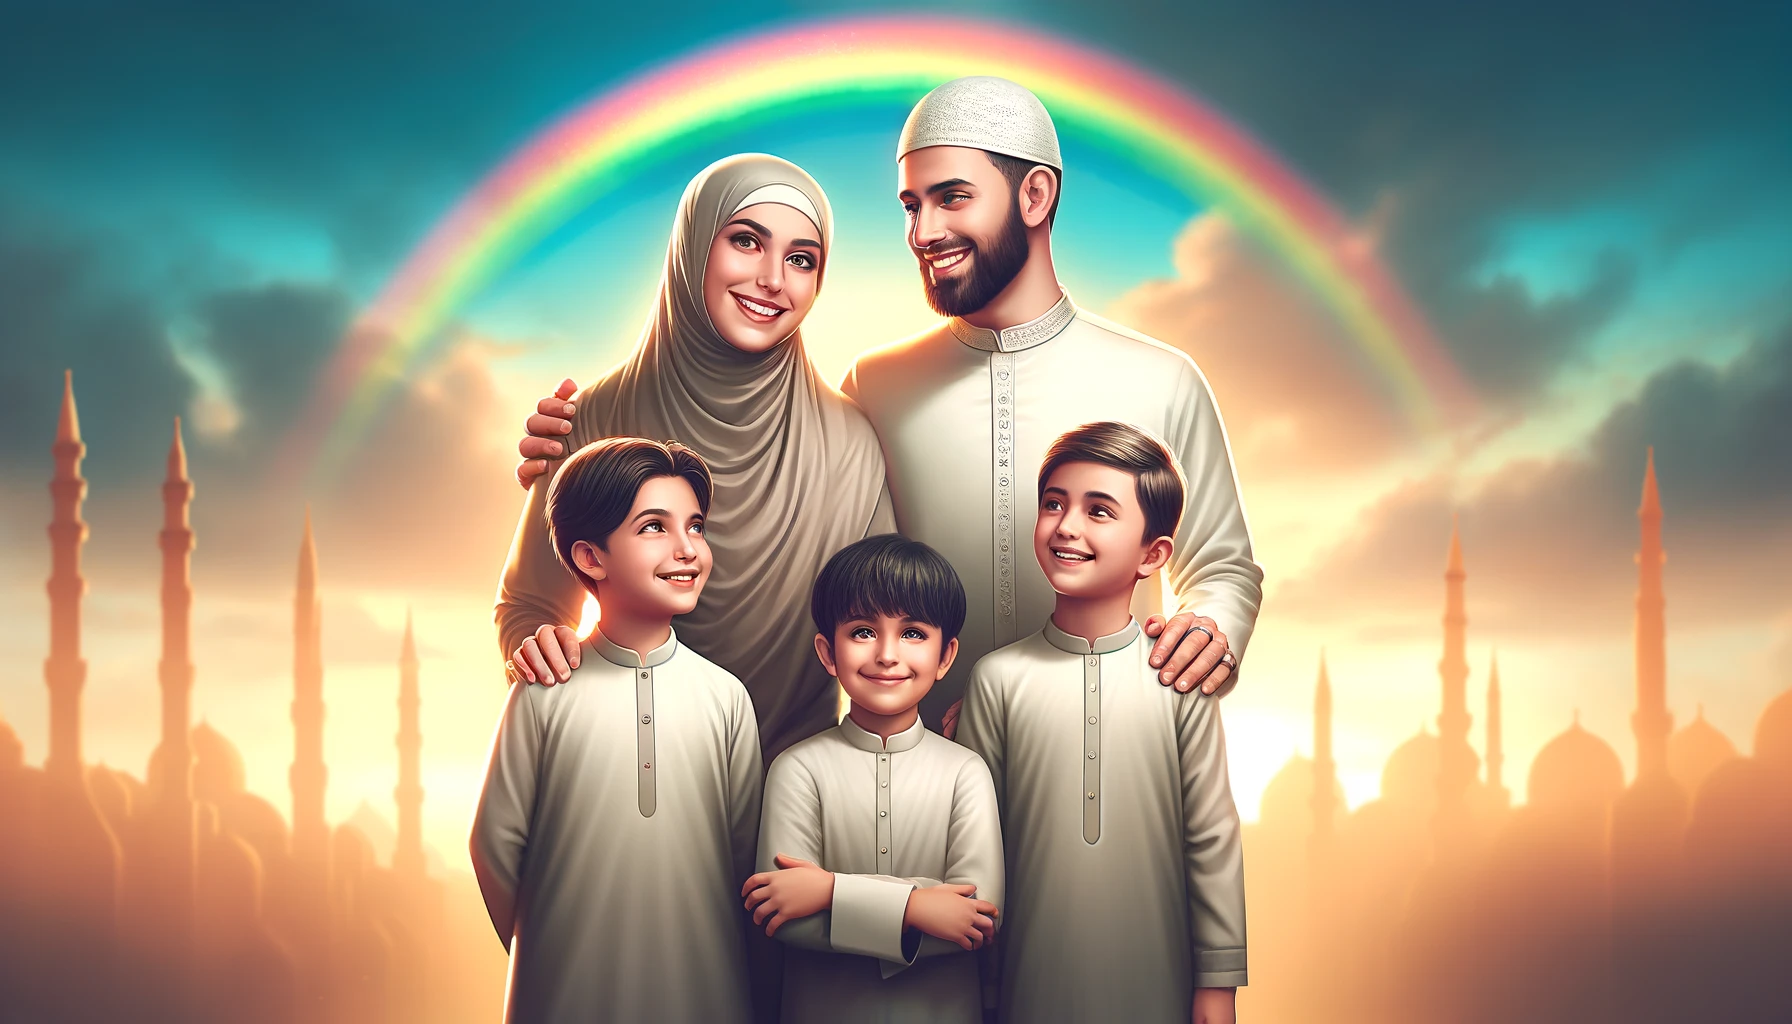 A Muslim couple with their children standing together, smiling, with a vibrant rainbow in the sky behind them. The family is dressed in traditional attire, symbolizing unity and family values.